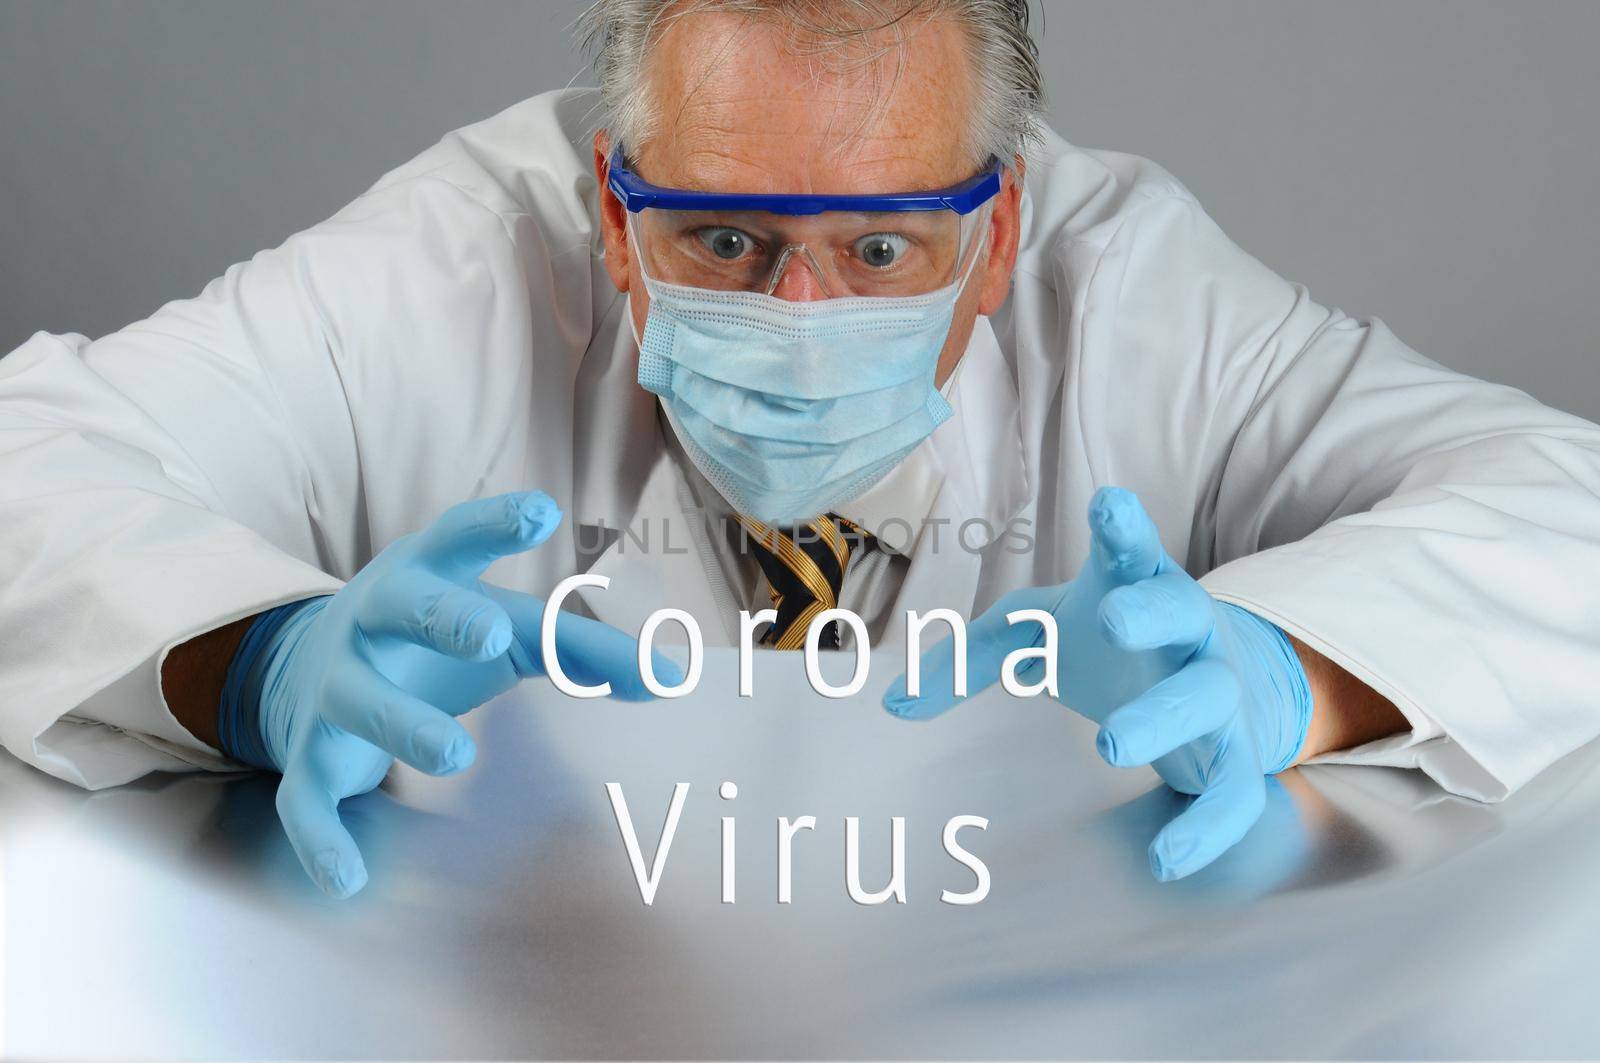 Doctor or scientist trying to get his hands around the Coronavirus, before and epicemic breaks out. by sCukrov